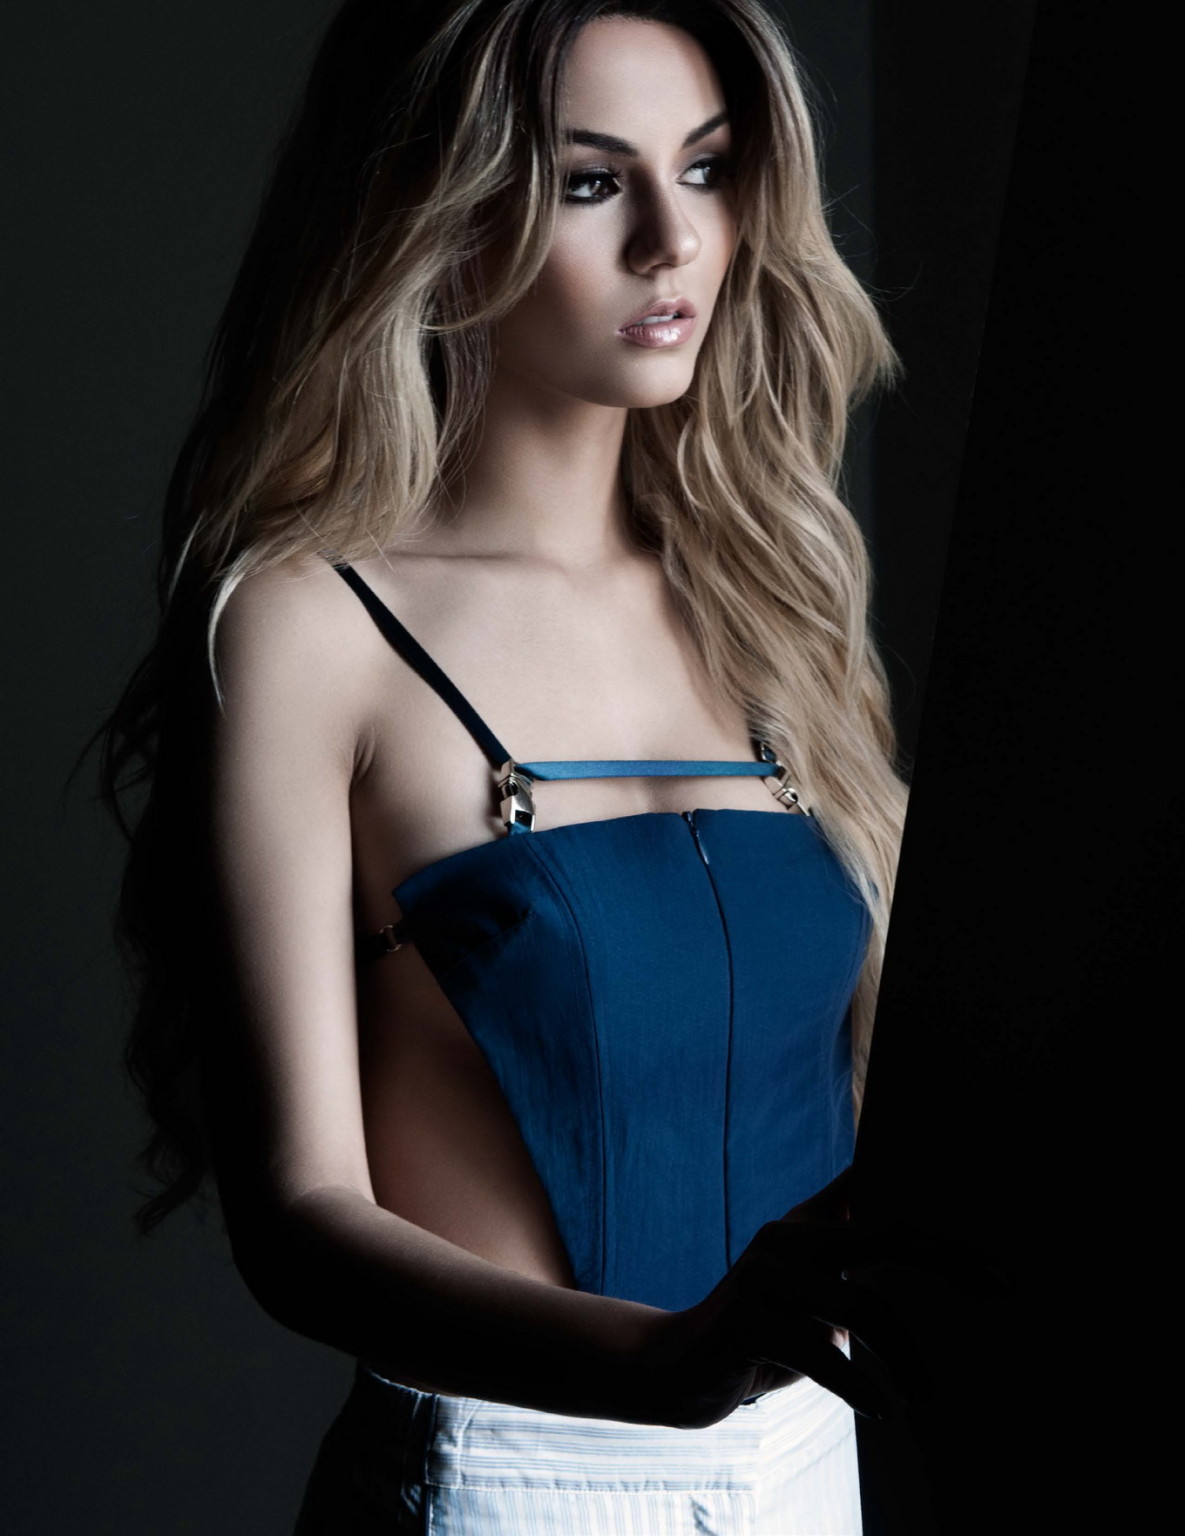 Victoria Justice revealing her beautiful body for Kode MagazineSpring 2015 issue #75169115